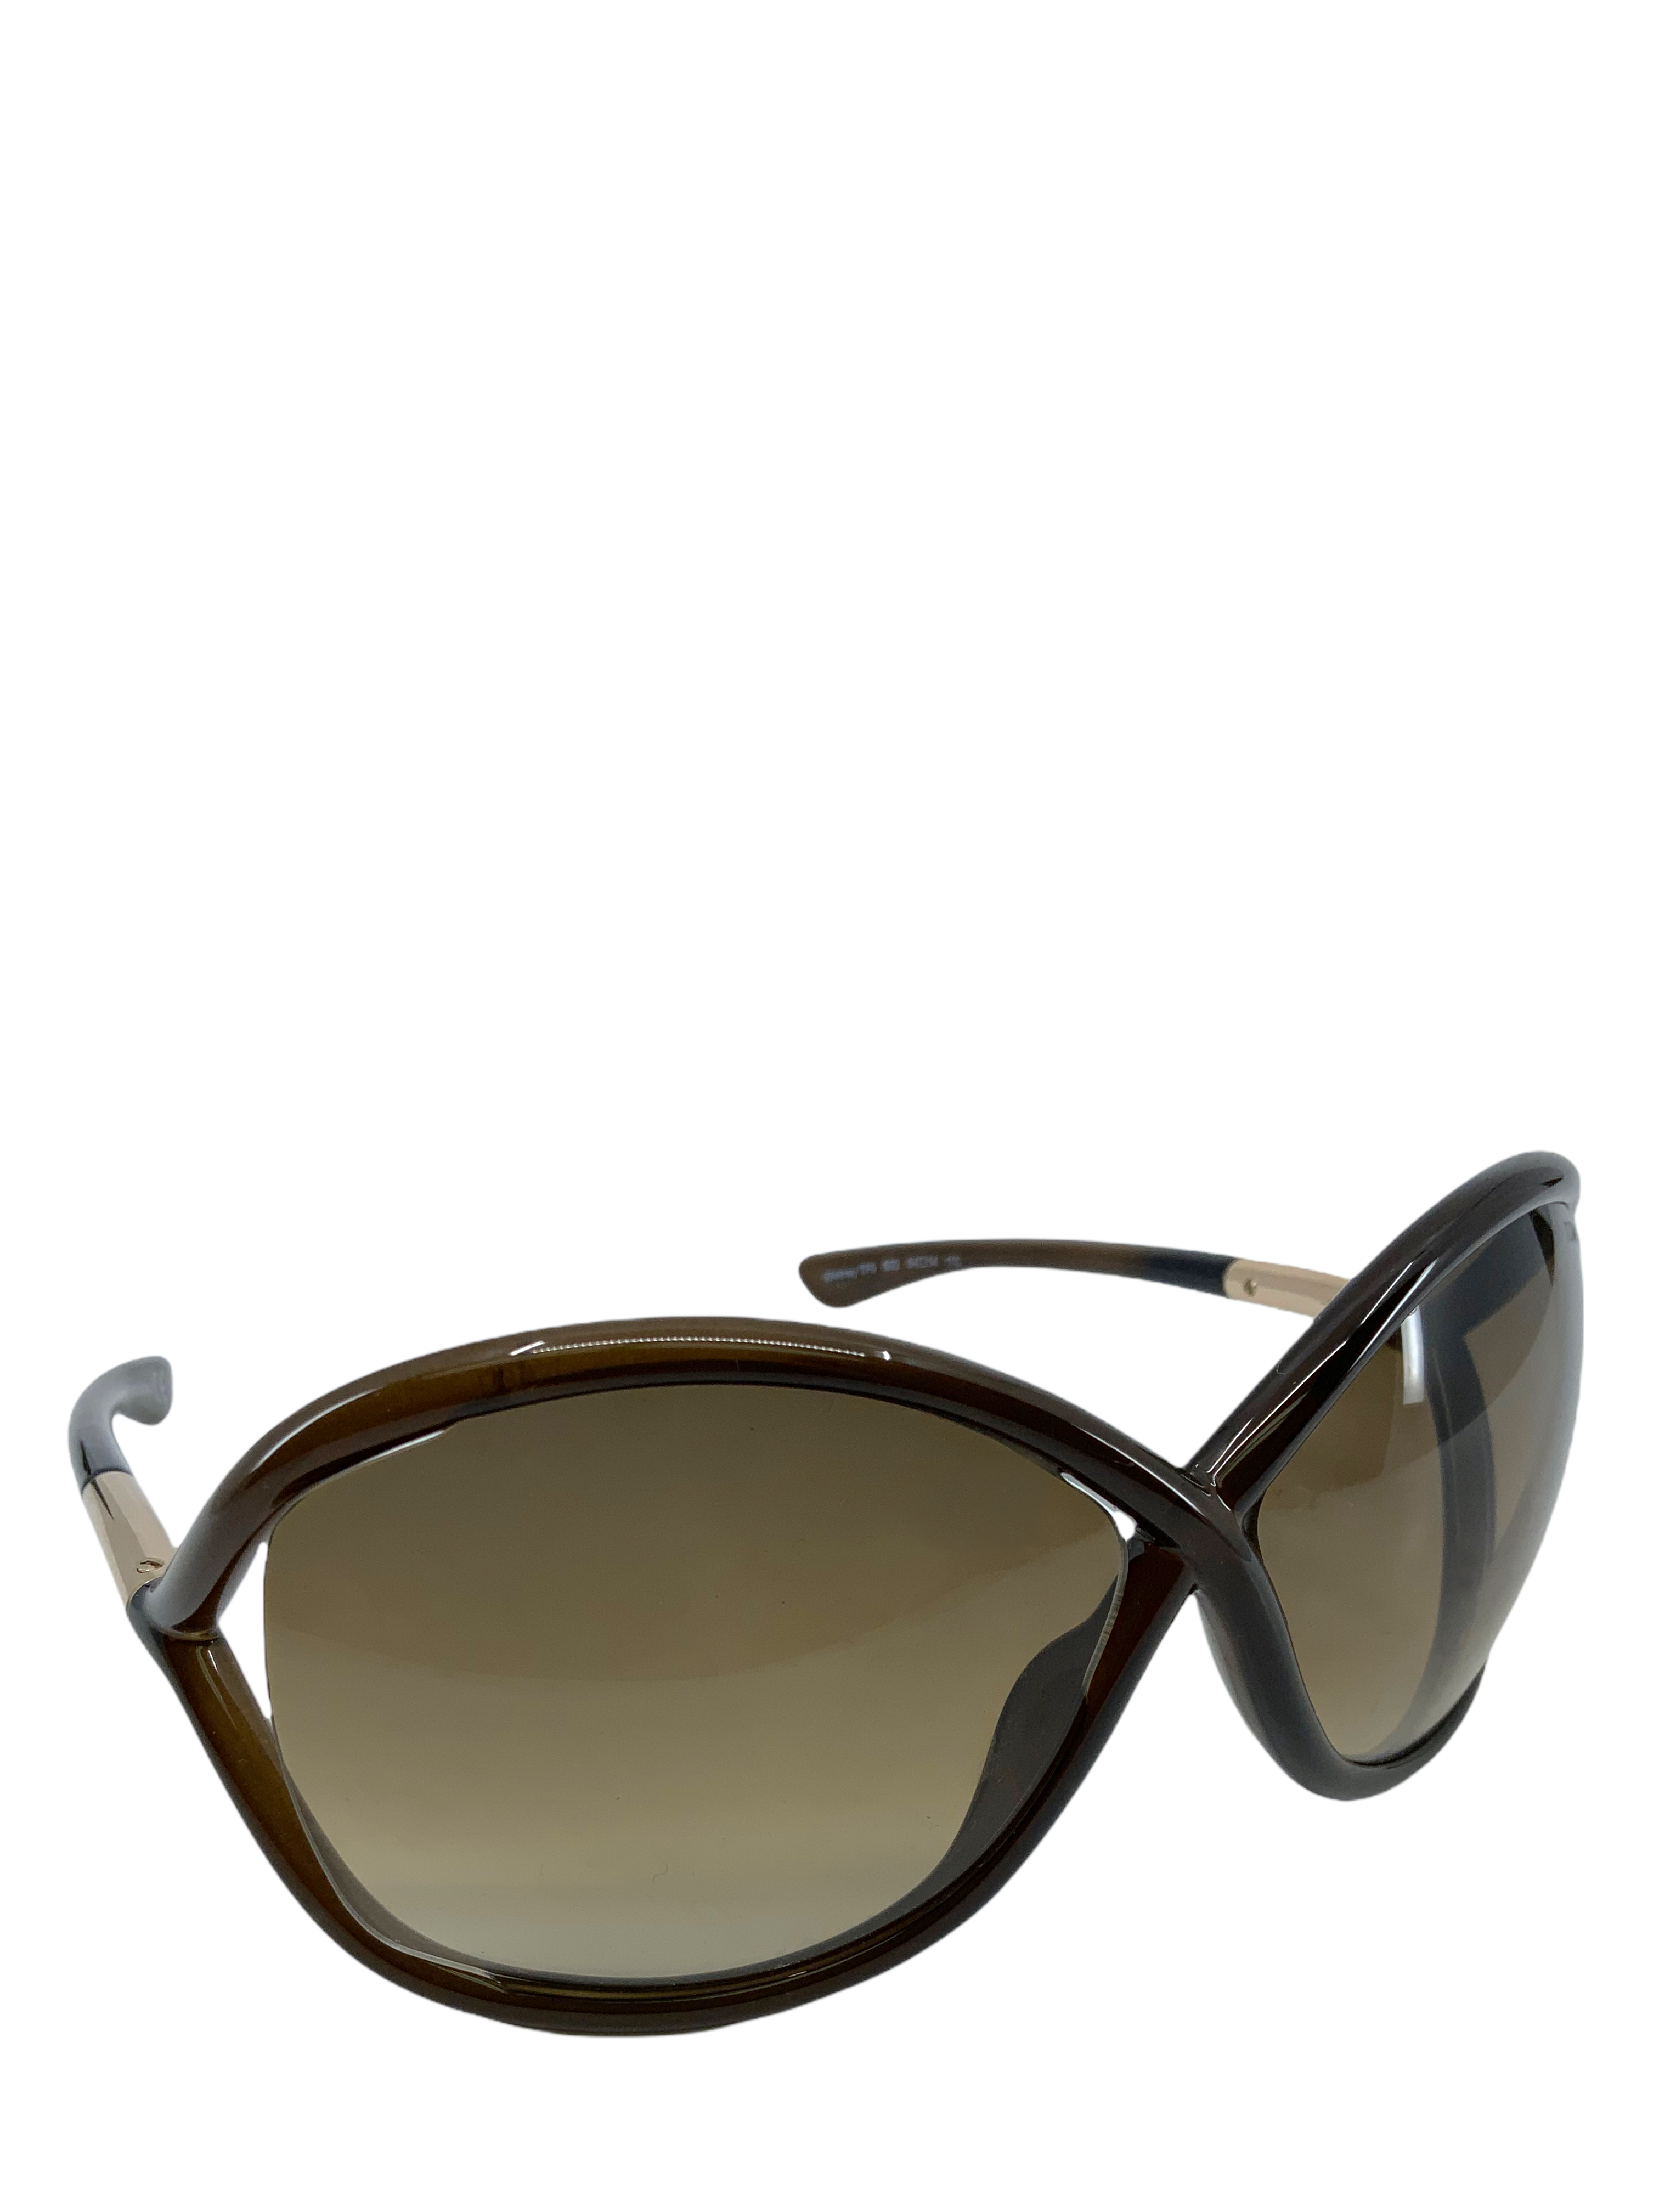 Tom Ford TF9 Whitney Polarized Sunglasses - Consigned Designs